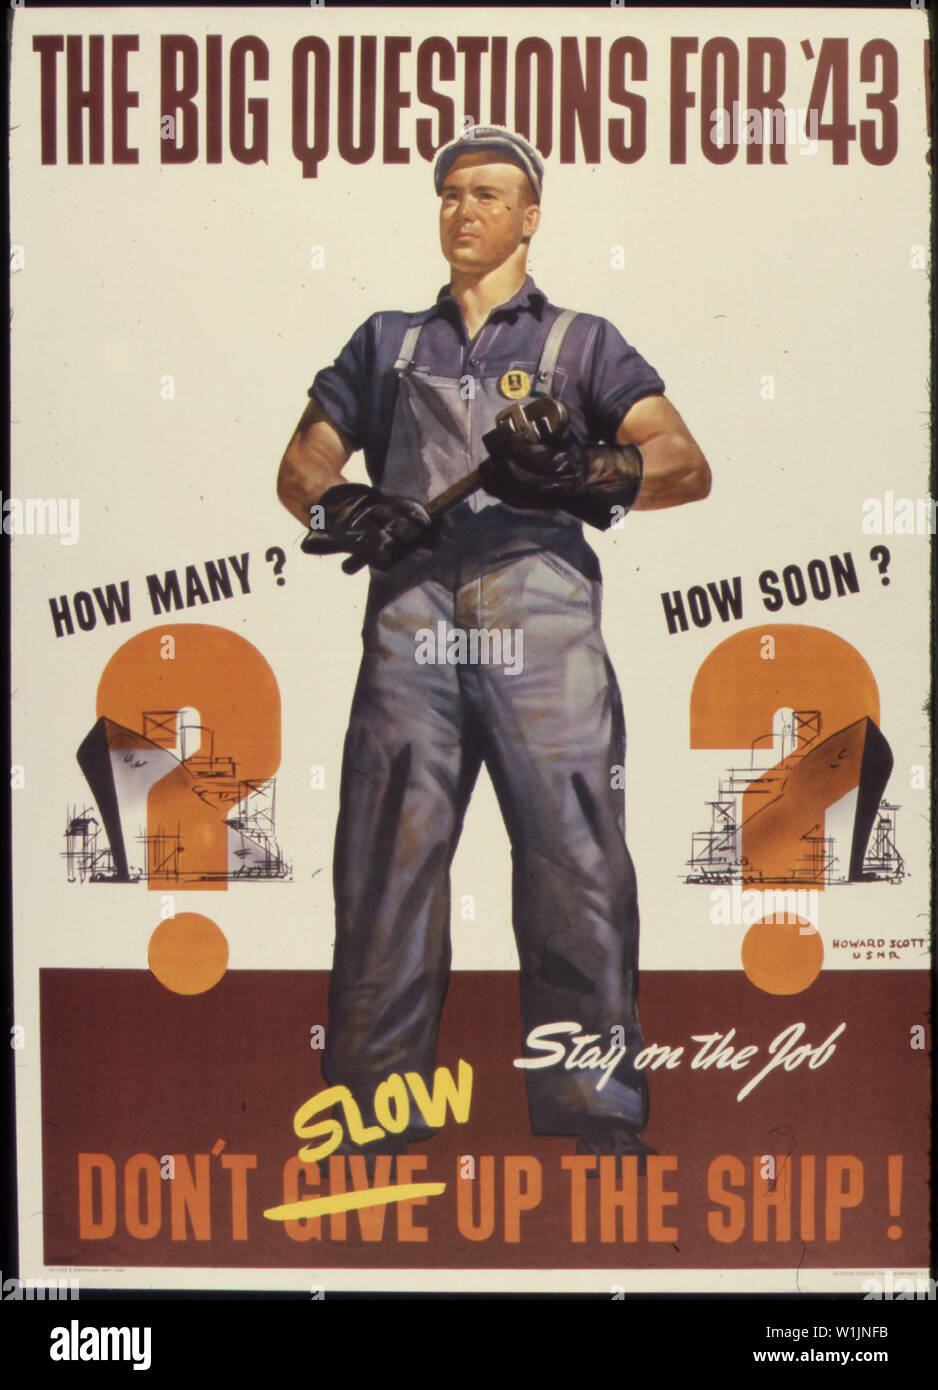 The big questions for `43. How many? How soon? Stay on the job. Don't slow up the ship! Stock Photo